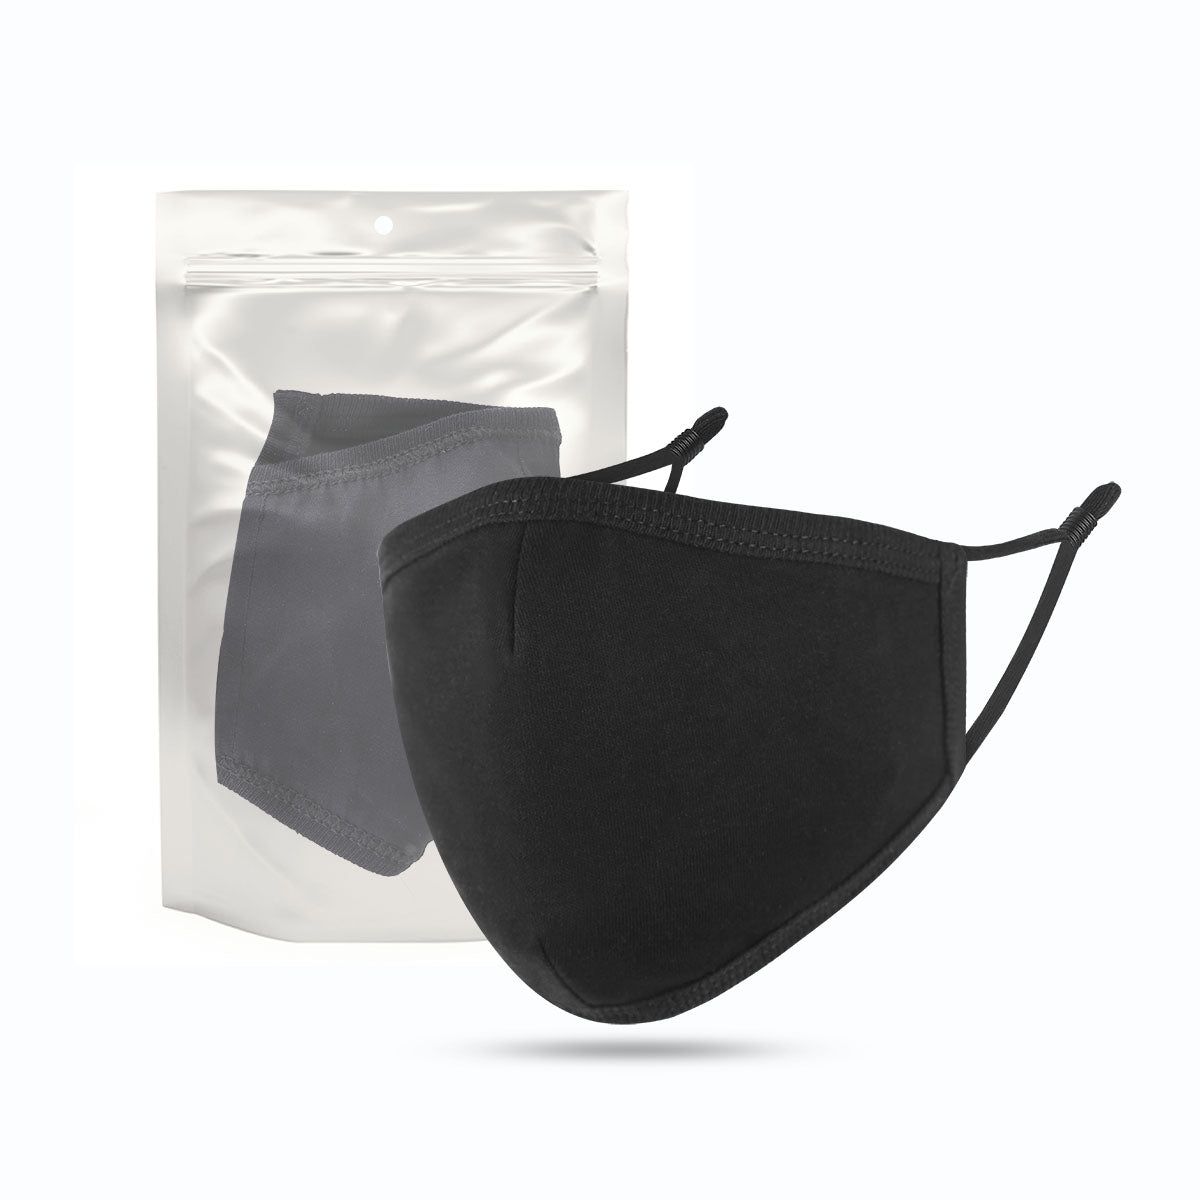 REUSABLE FACE MASK with PM2.5 Filter